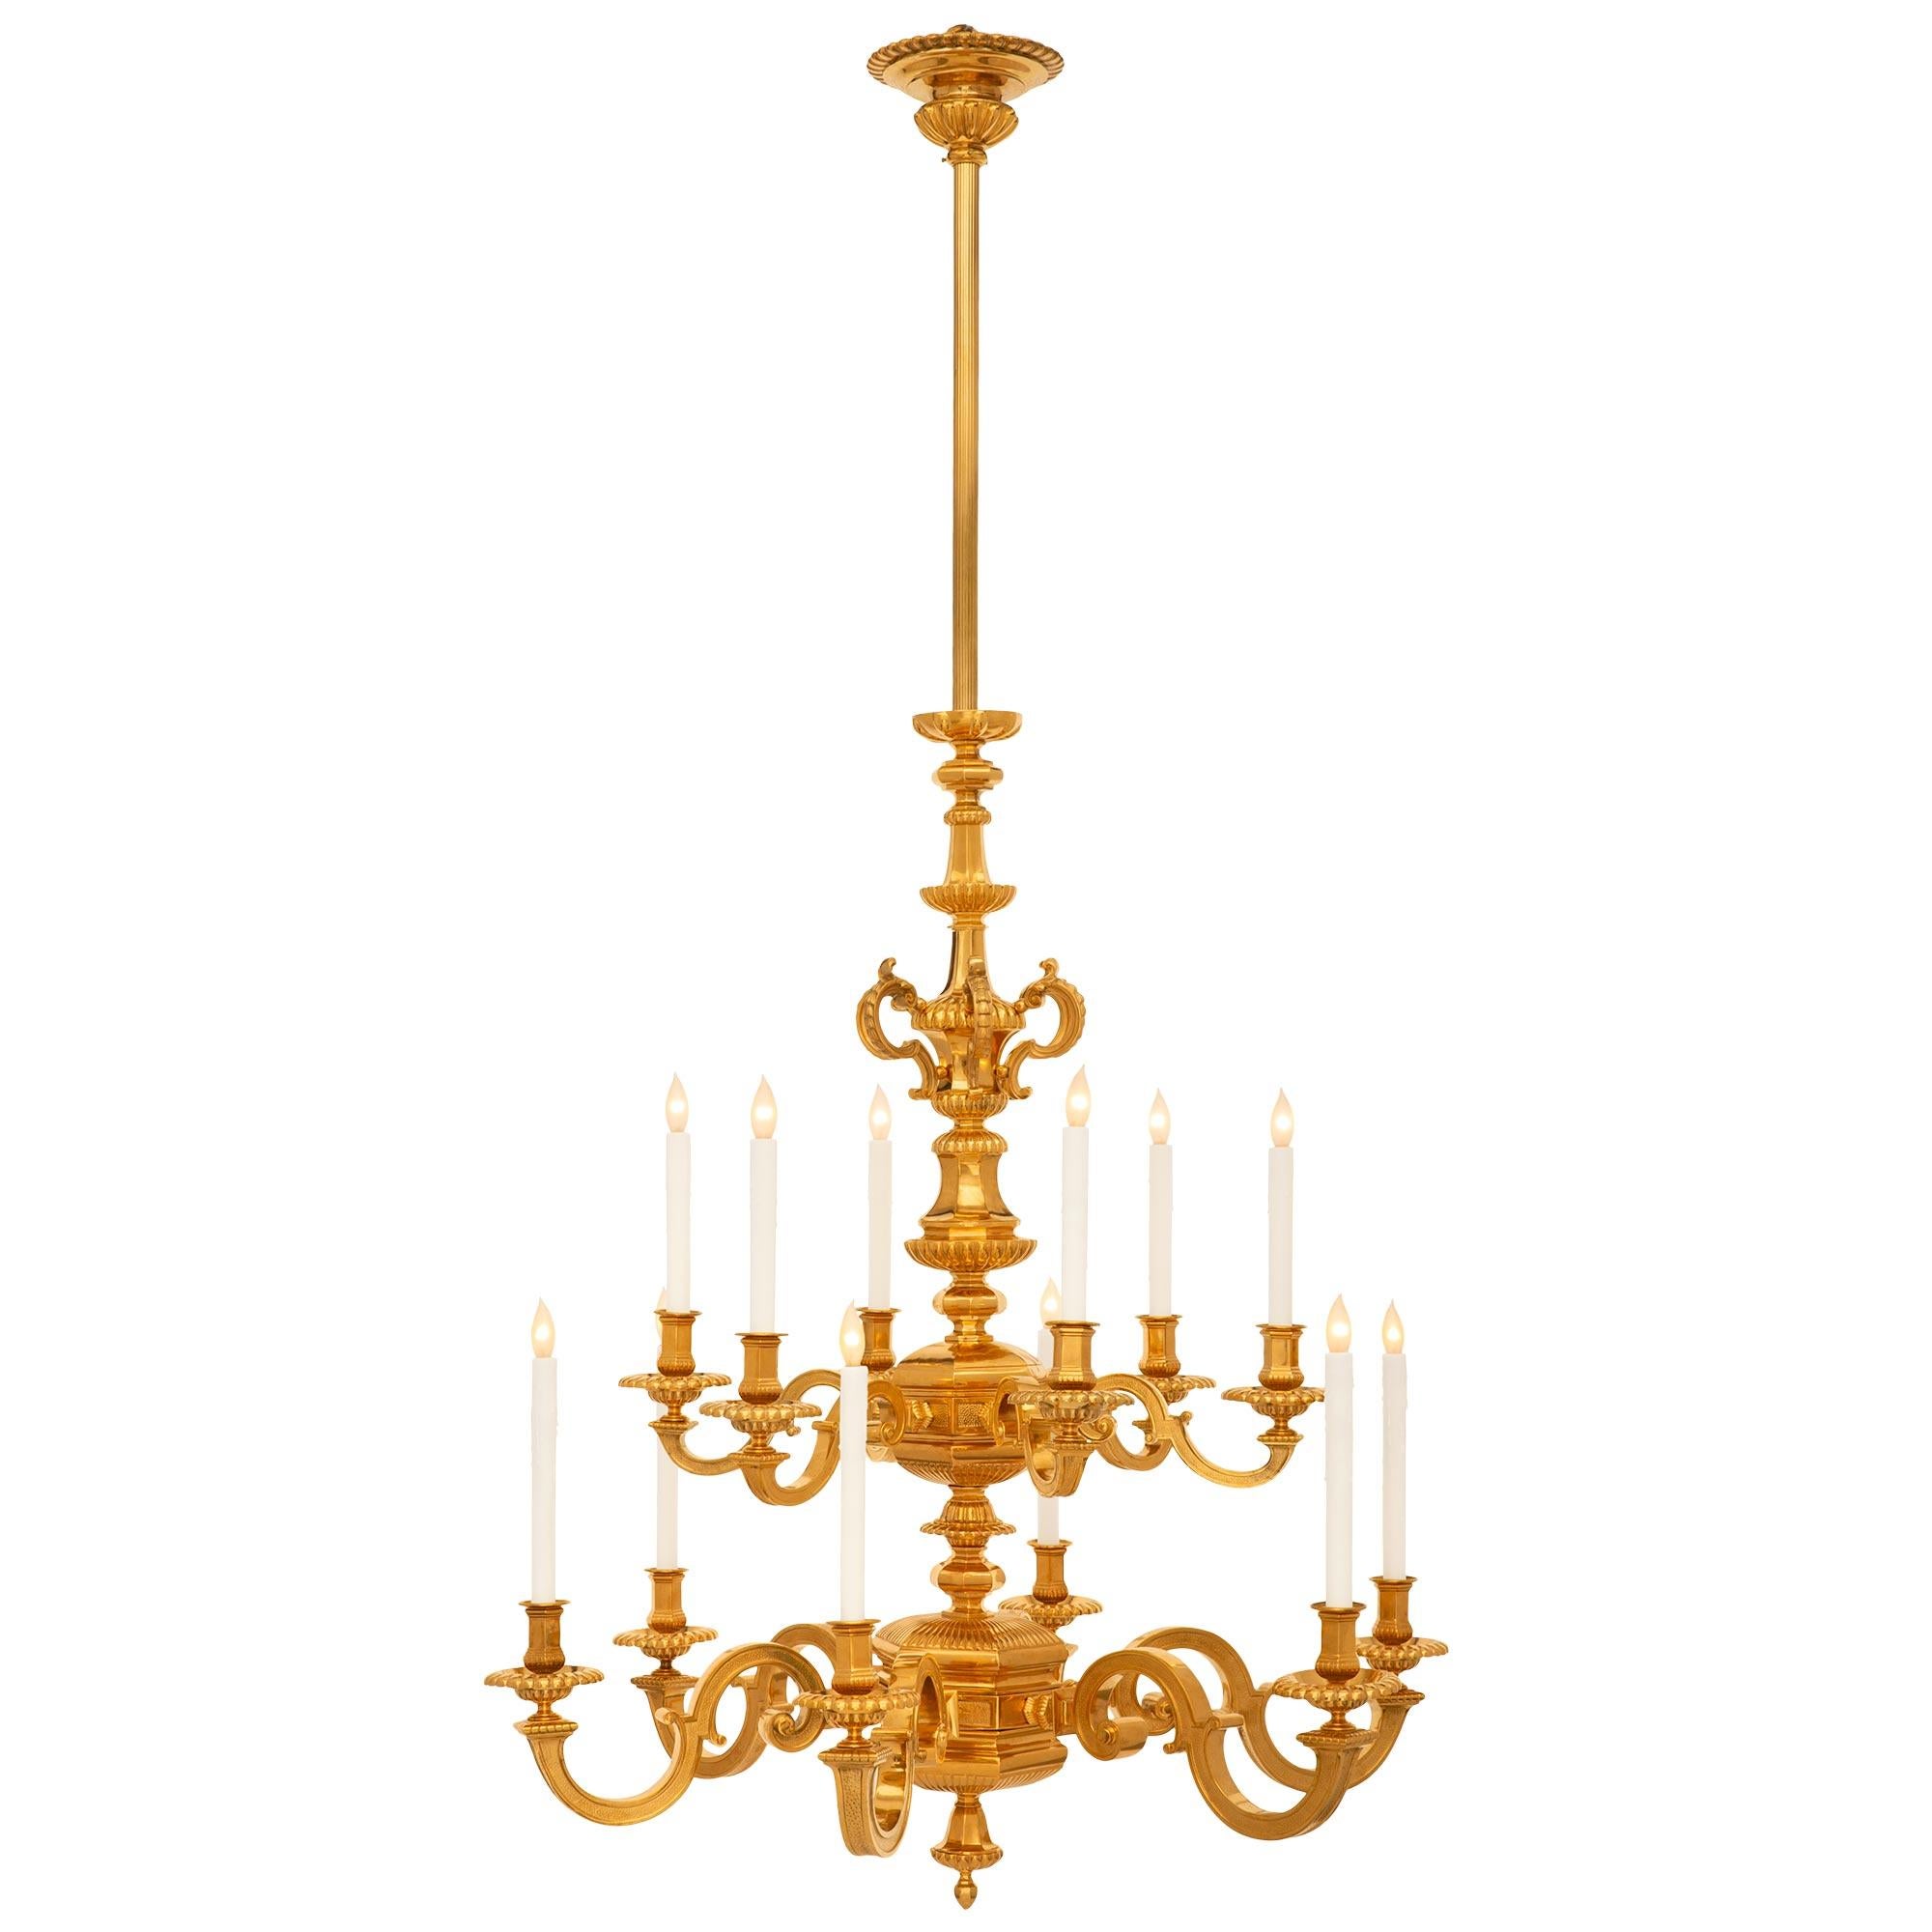 French 19th century Louis XVI st. Ormolu chandelier In Good Condition For Sale In West Palm Beach, FL